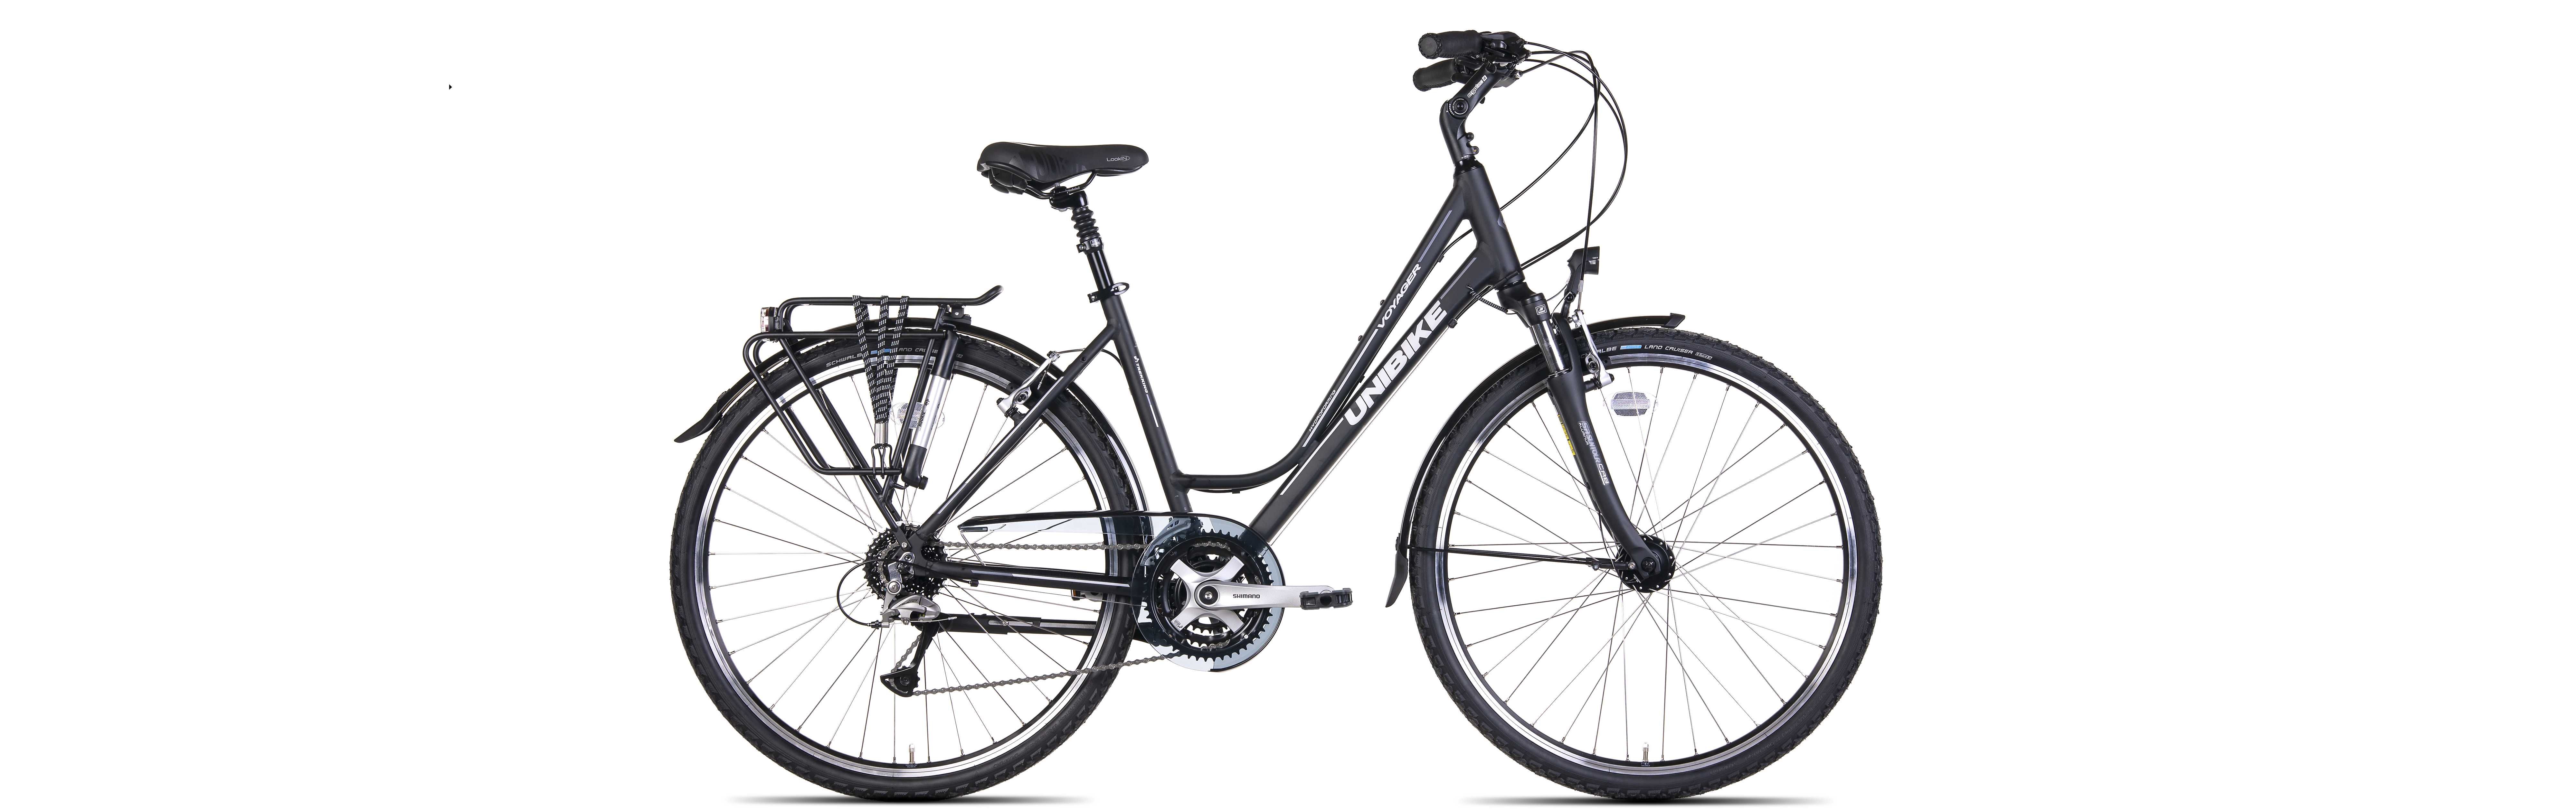 unibike voyager olx